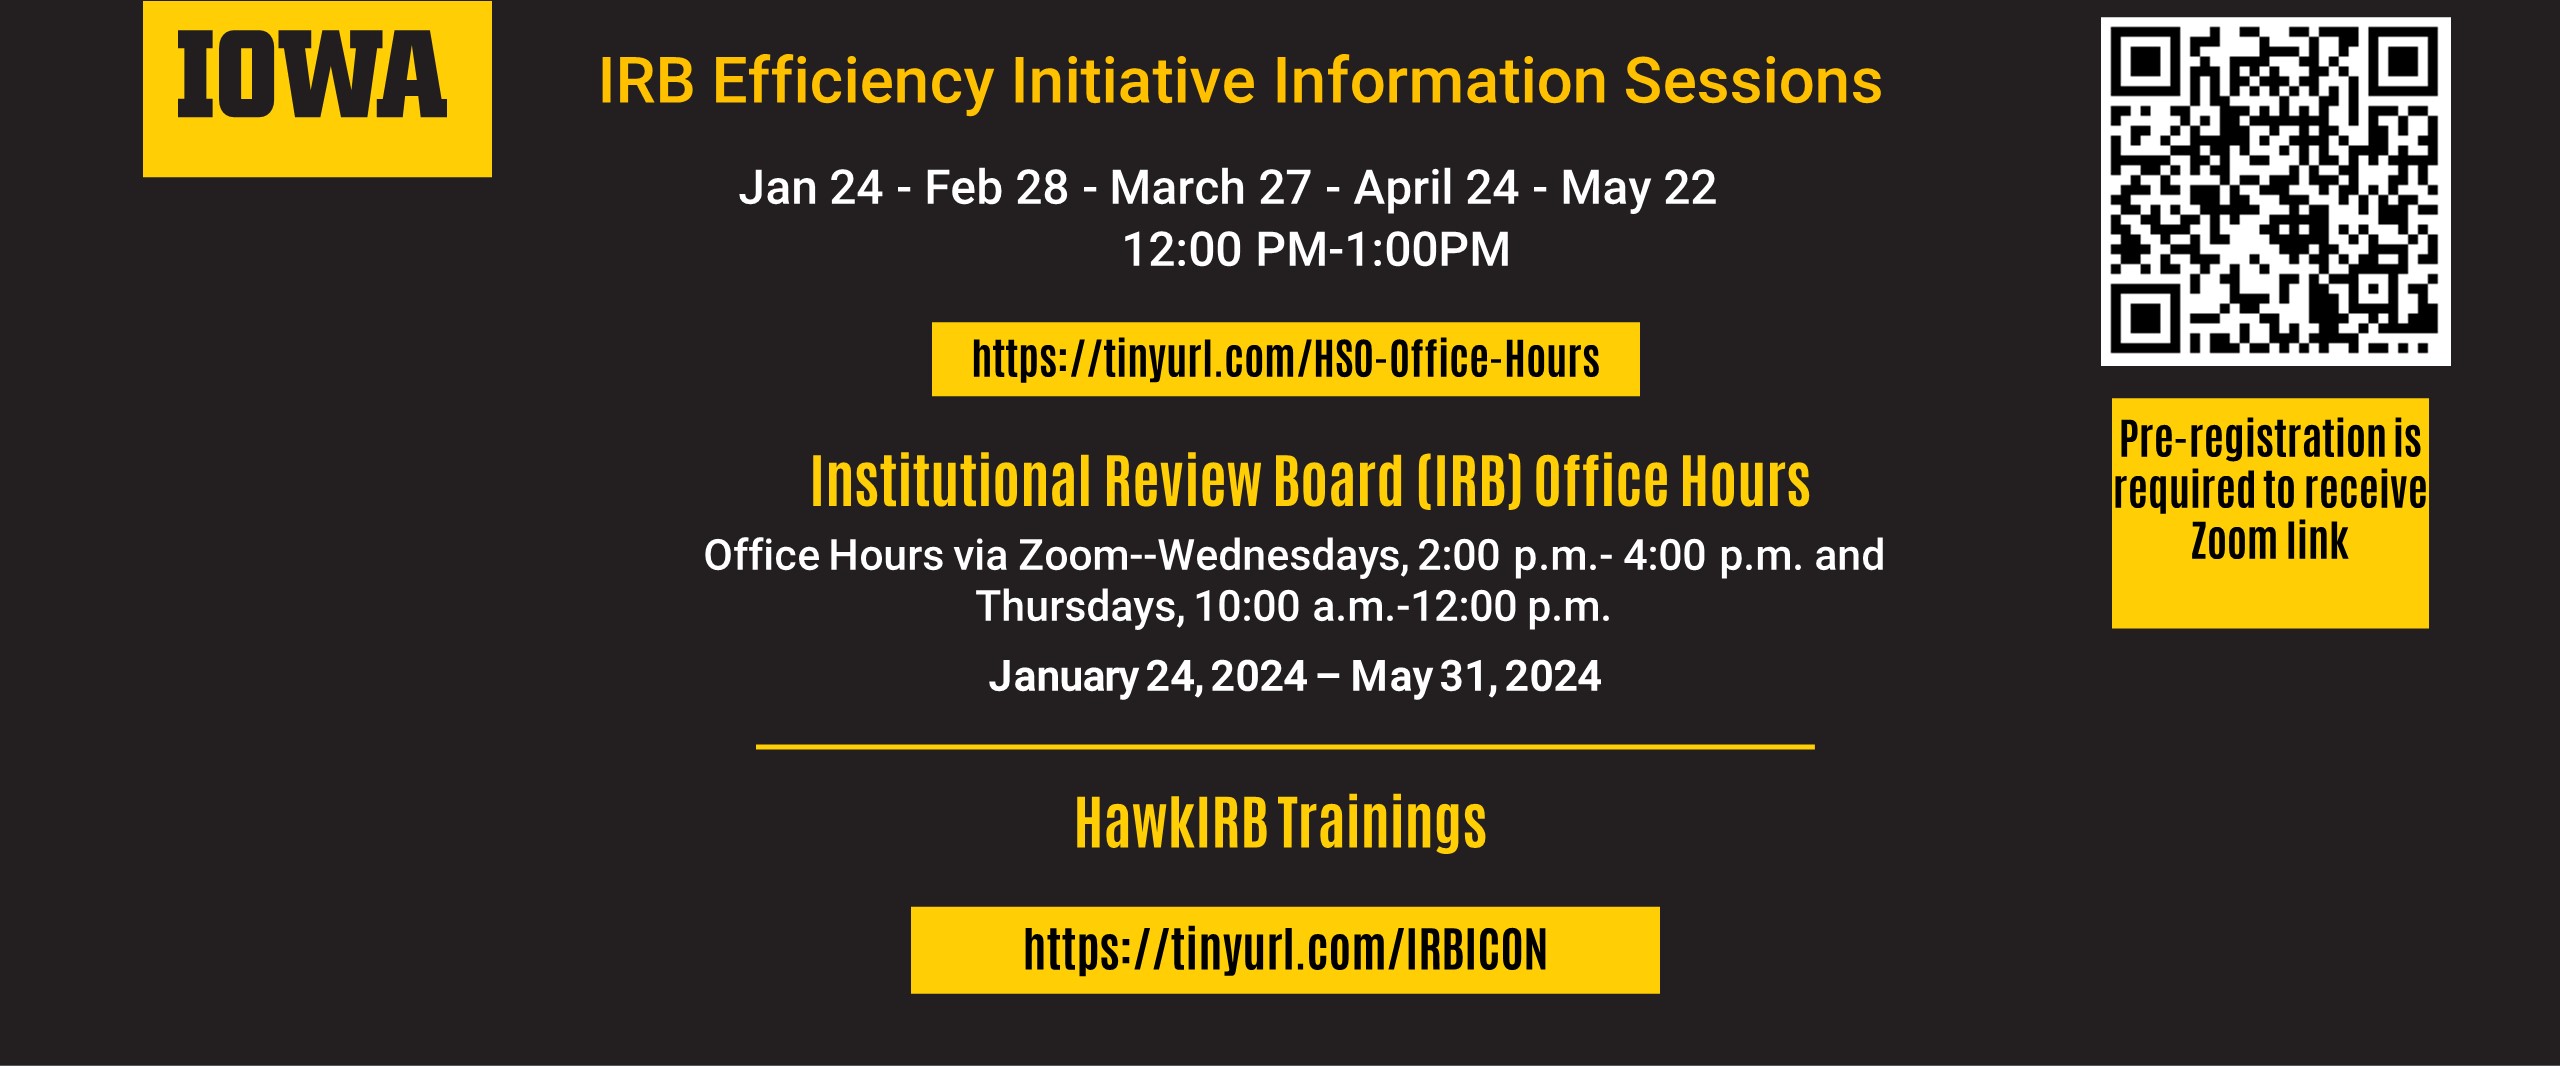 IRB Efficiency Initiative Information Sessions 